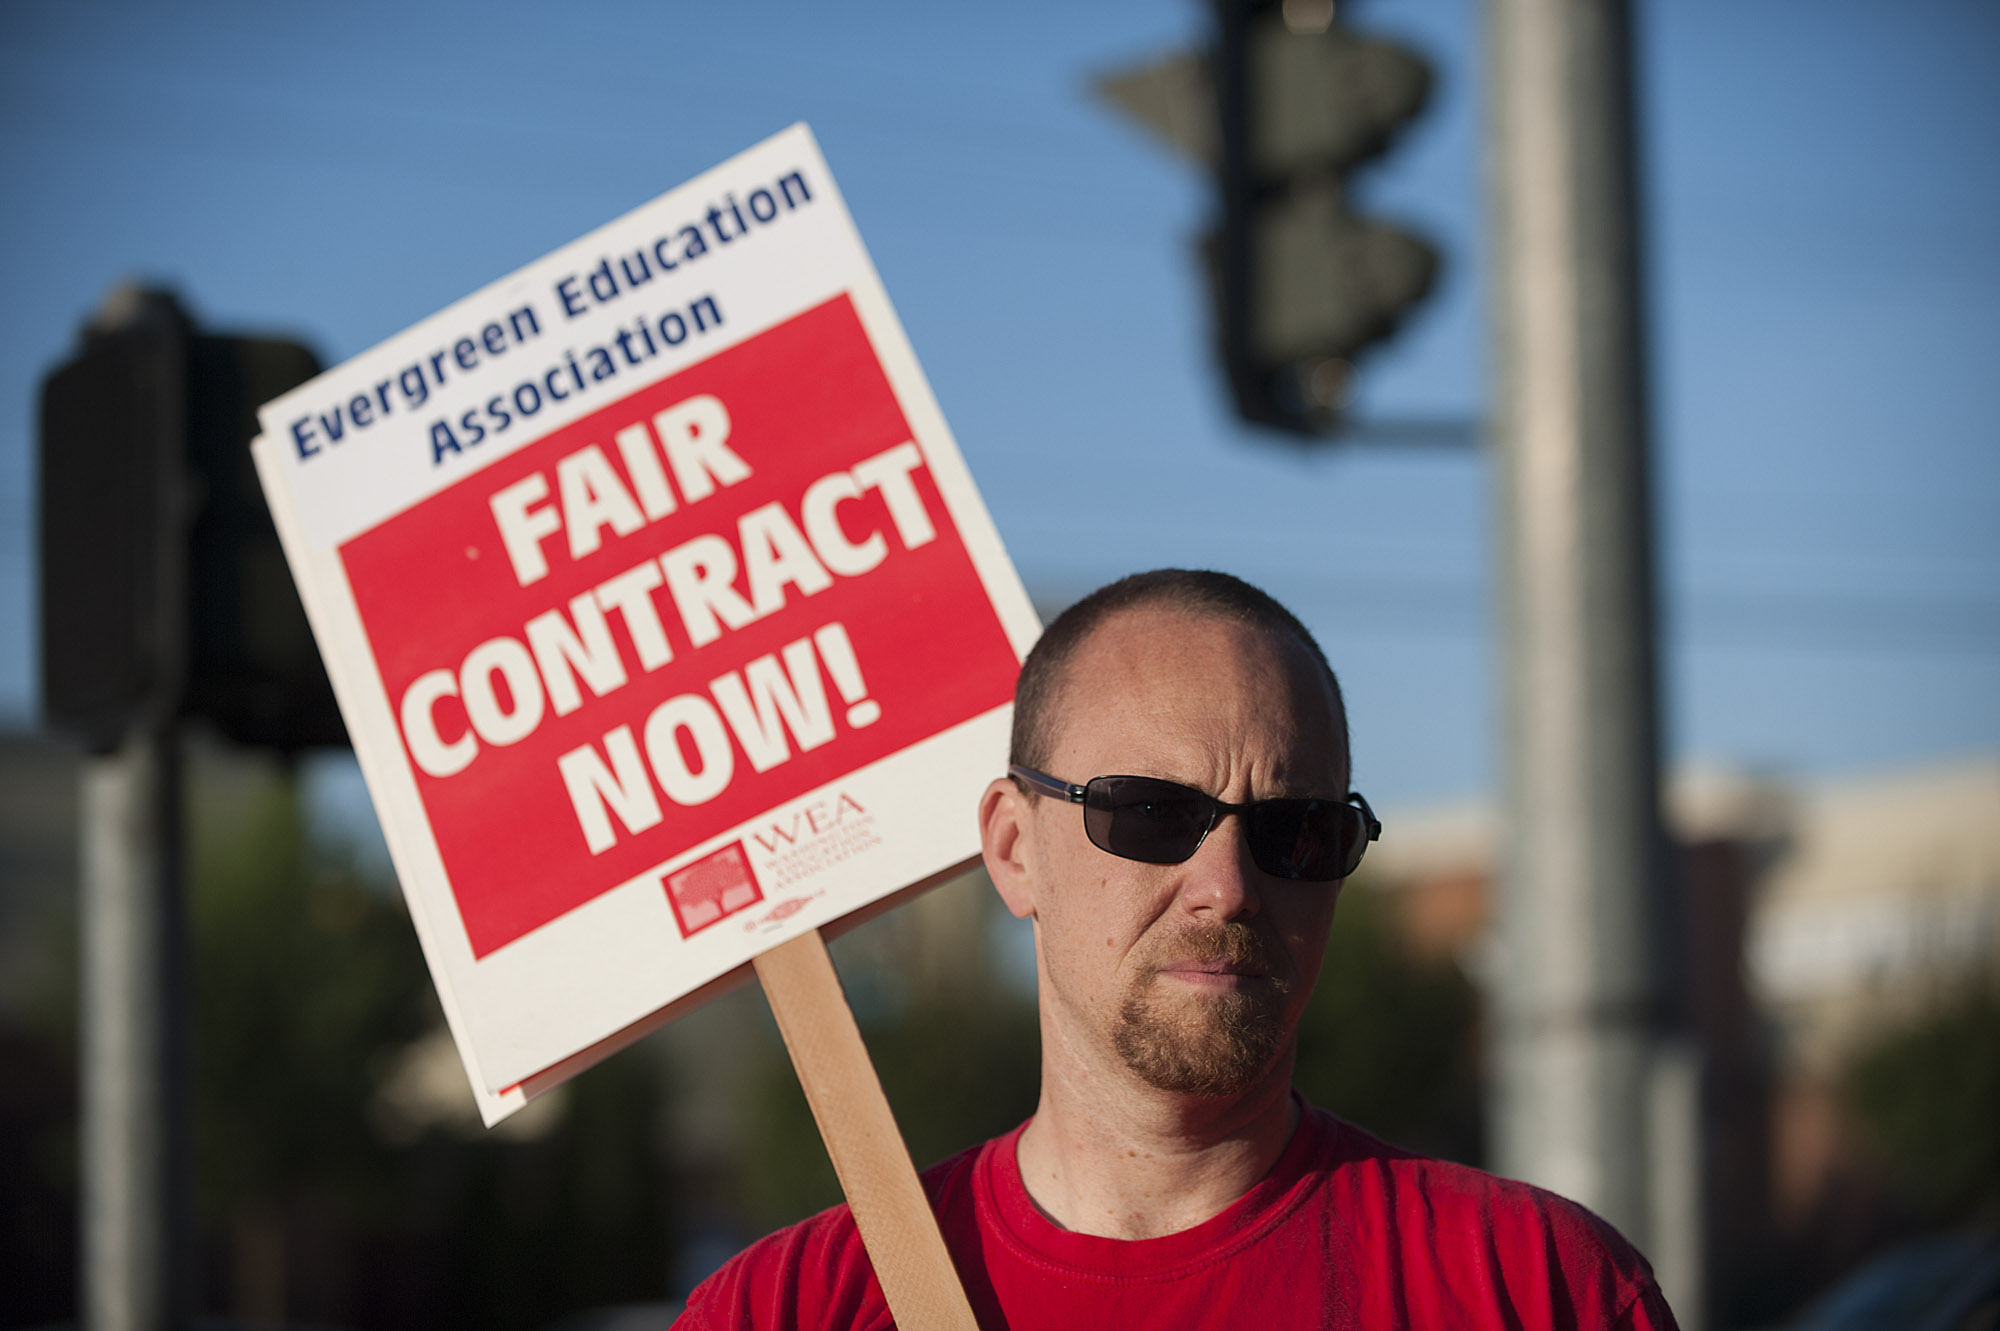 Evergreen School District and its union, Evergreen Education Association, reached a contract agreement early this morning, according to a Facebook post by the union.